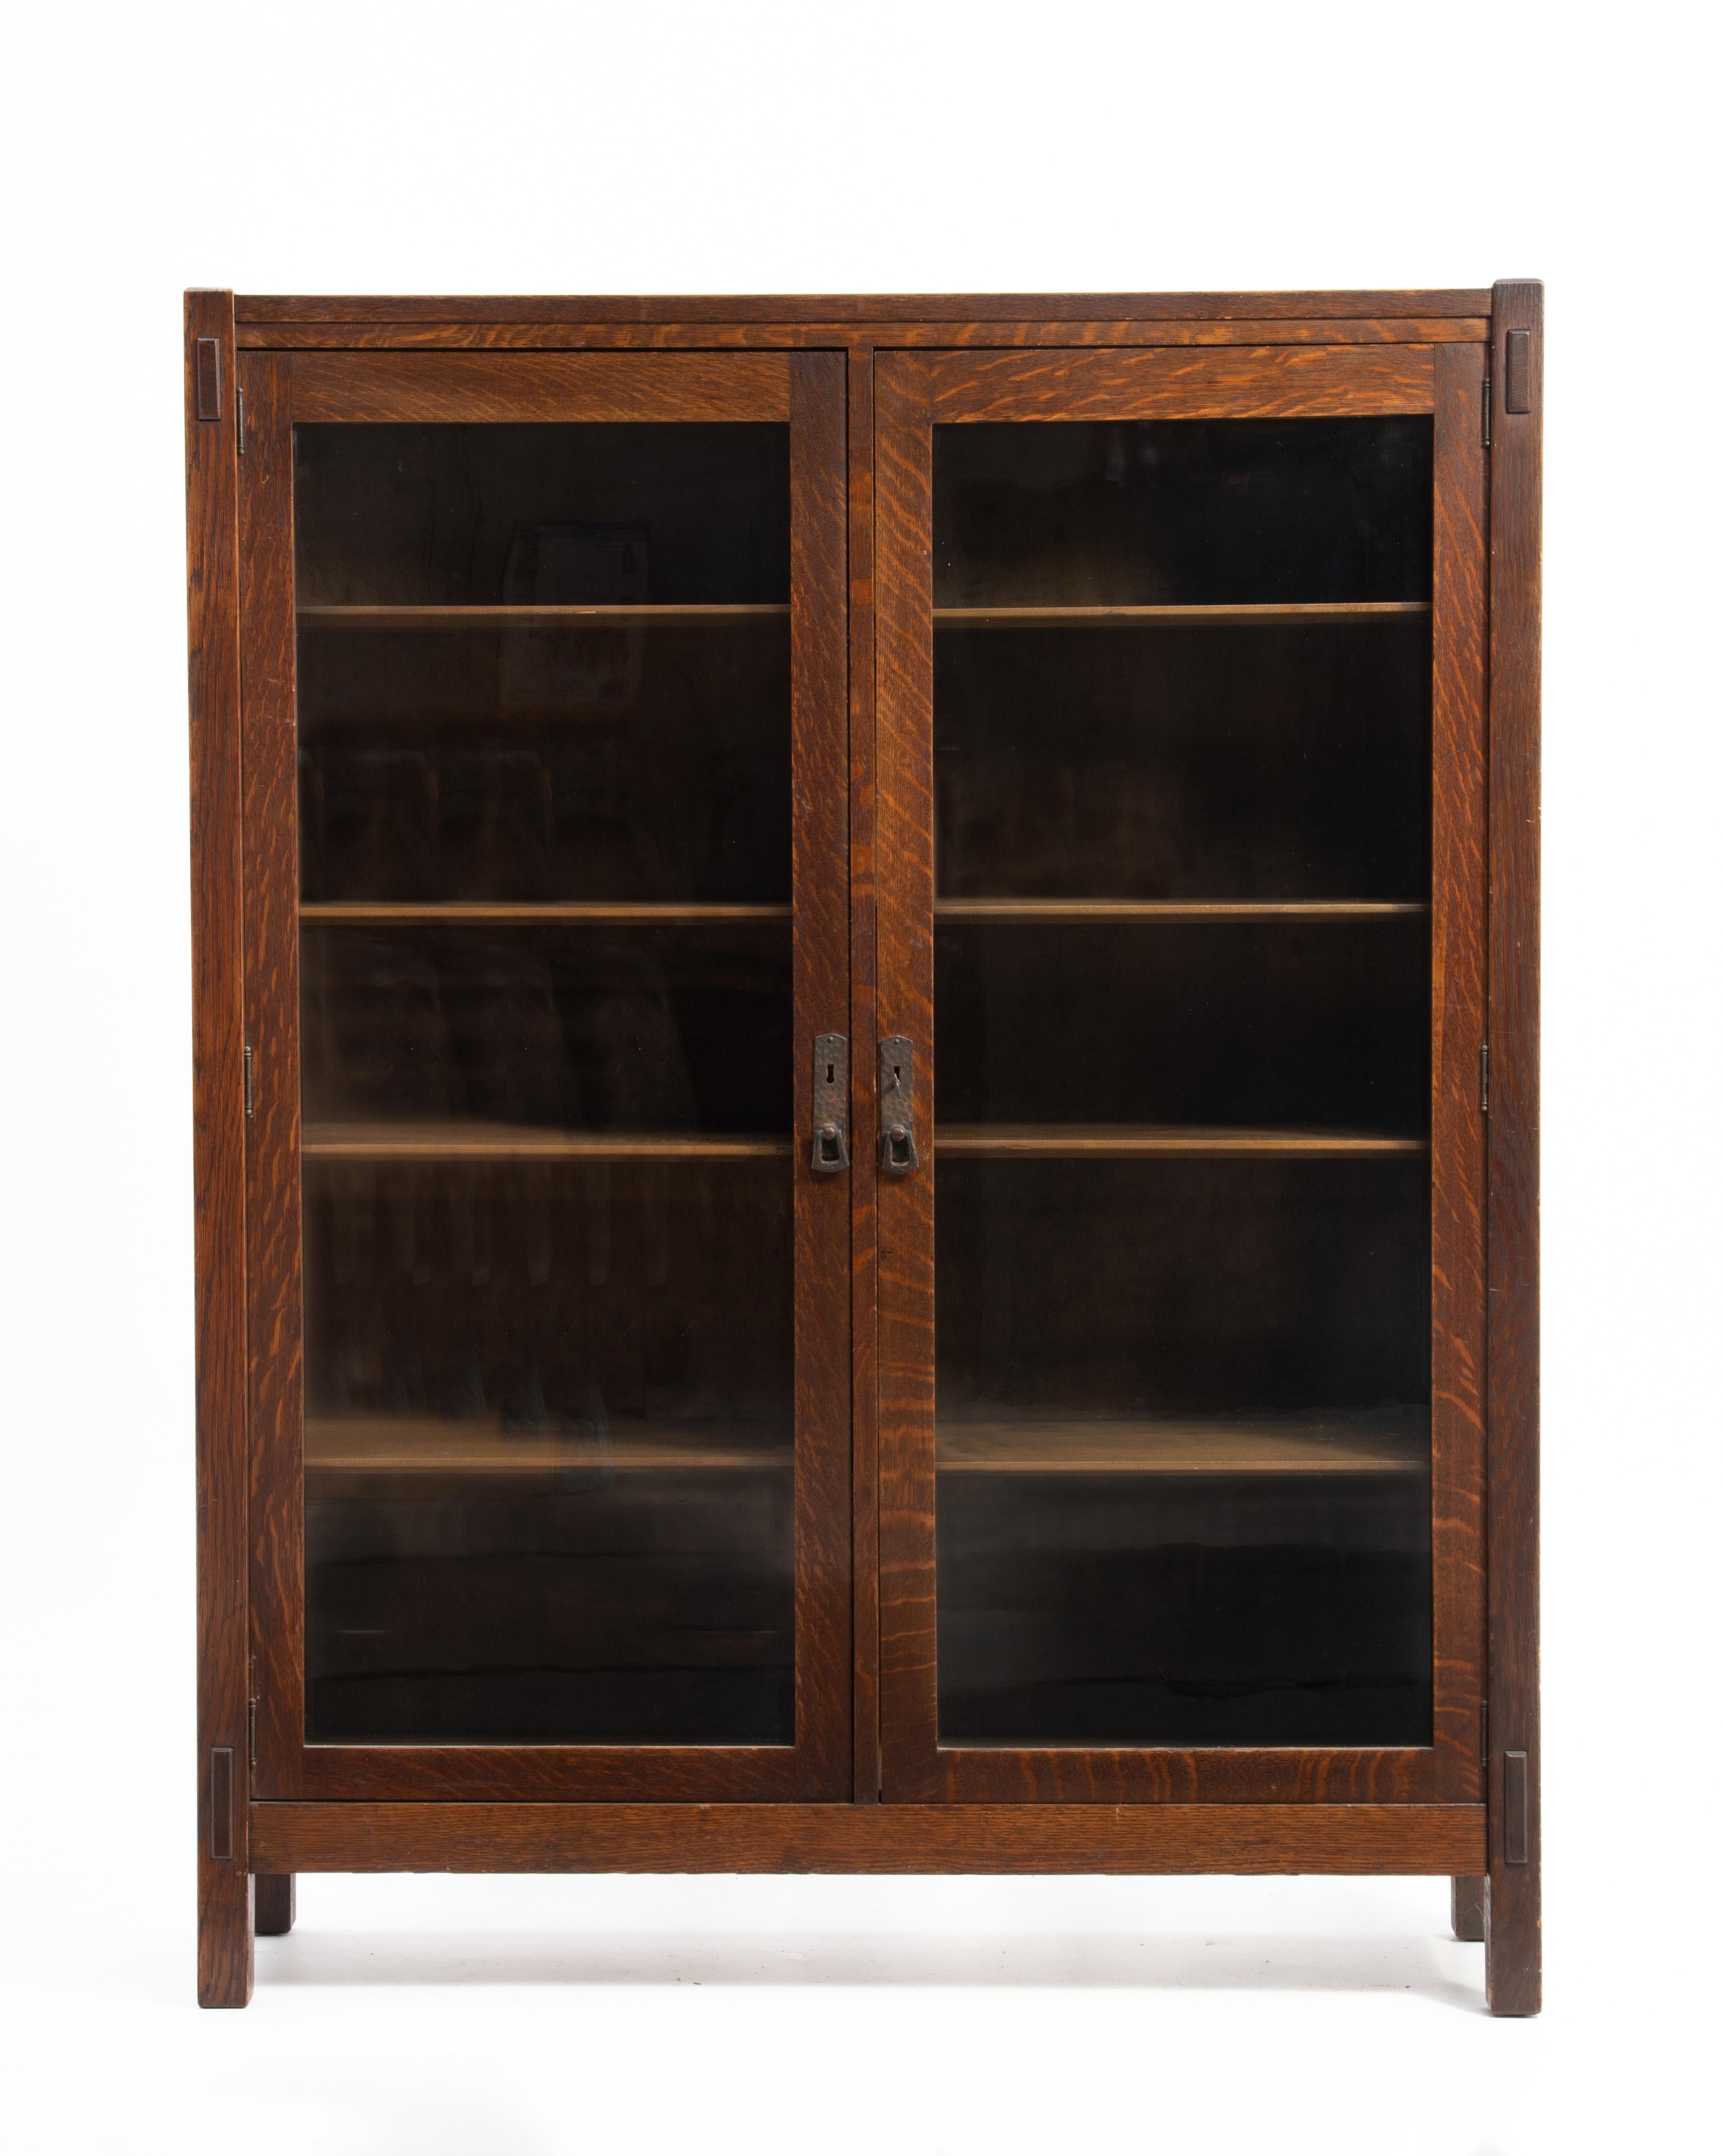 A beautiful, very well made and clean Mission Oak or Arts & Crafts bookcase, ca. 1905. 

Made by the Lifetime Furniture Company the bookcase retains the original medium brown finish. 

The bookcase features through tenons that are pegged on the top